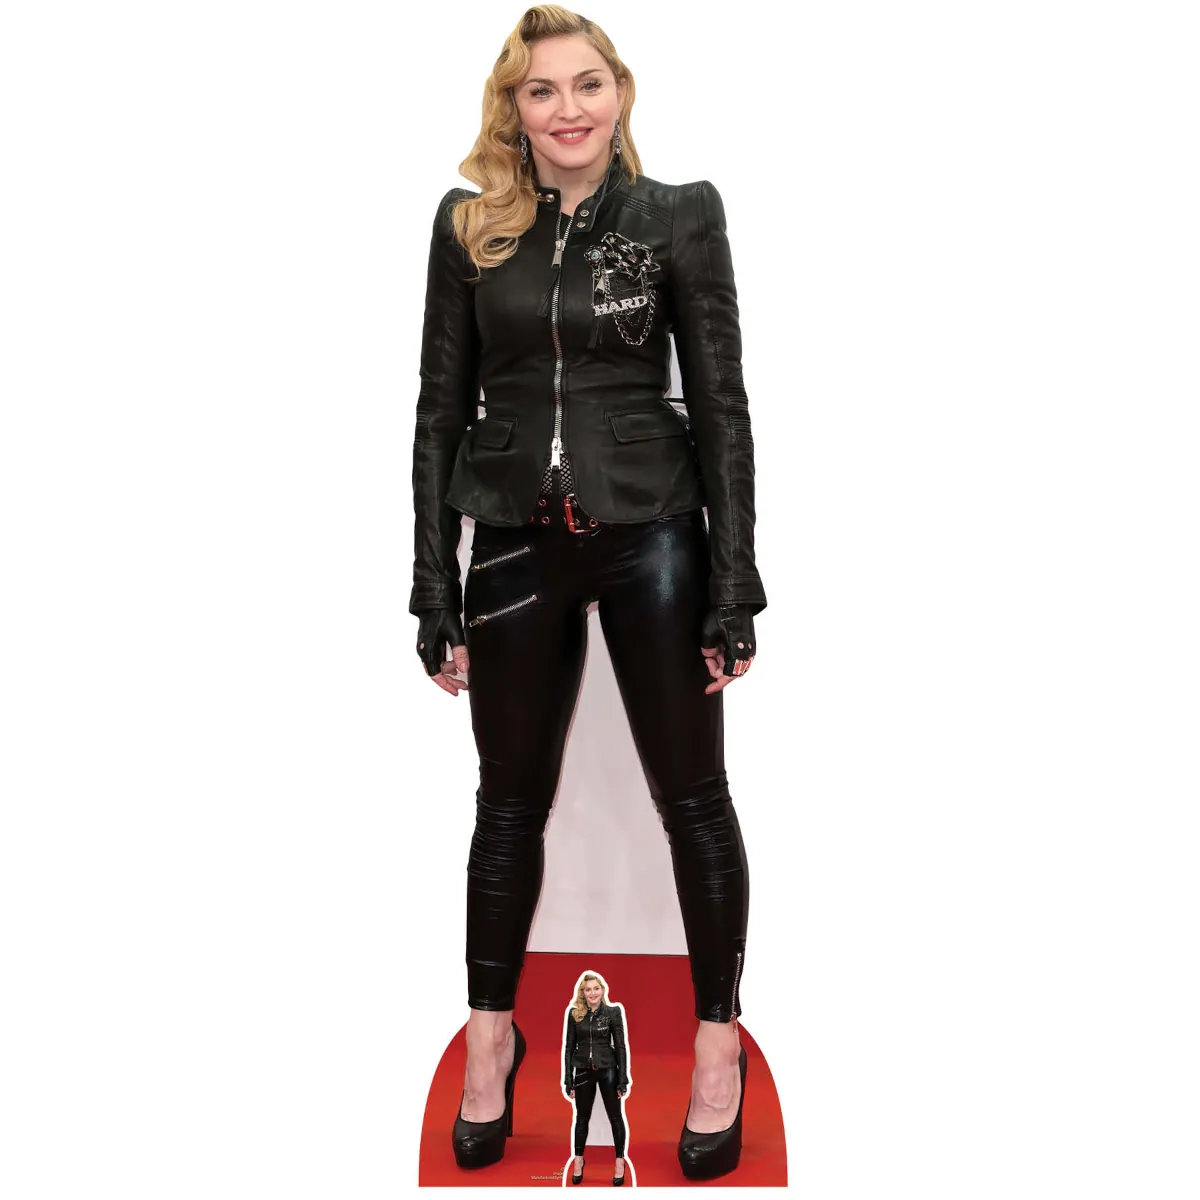 CS1030 Madonna 'Black Leather' (American Singer Songwriter) Lifesize + Mini Cardboard Cutout Standee Front